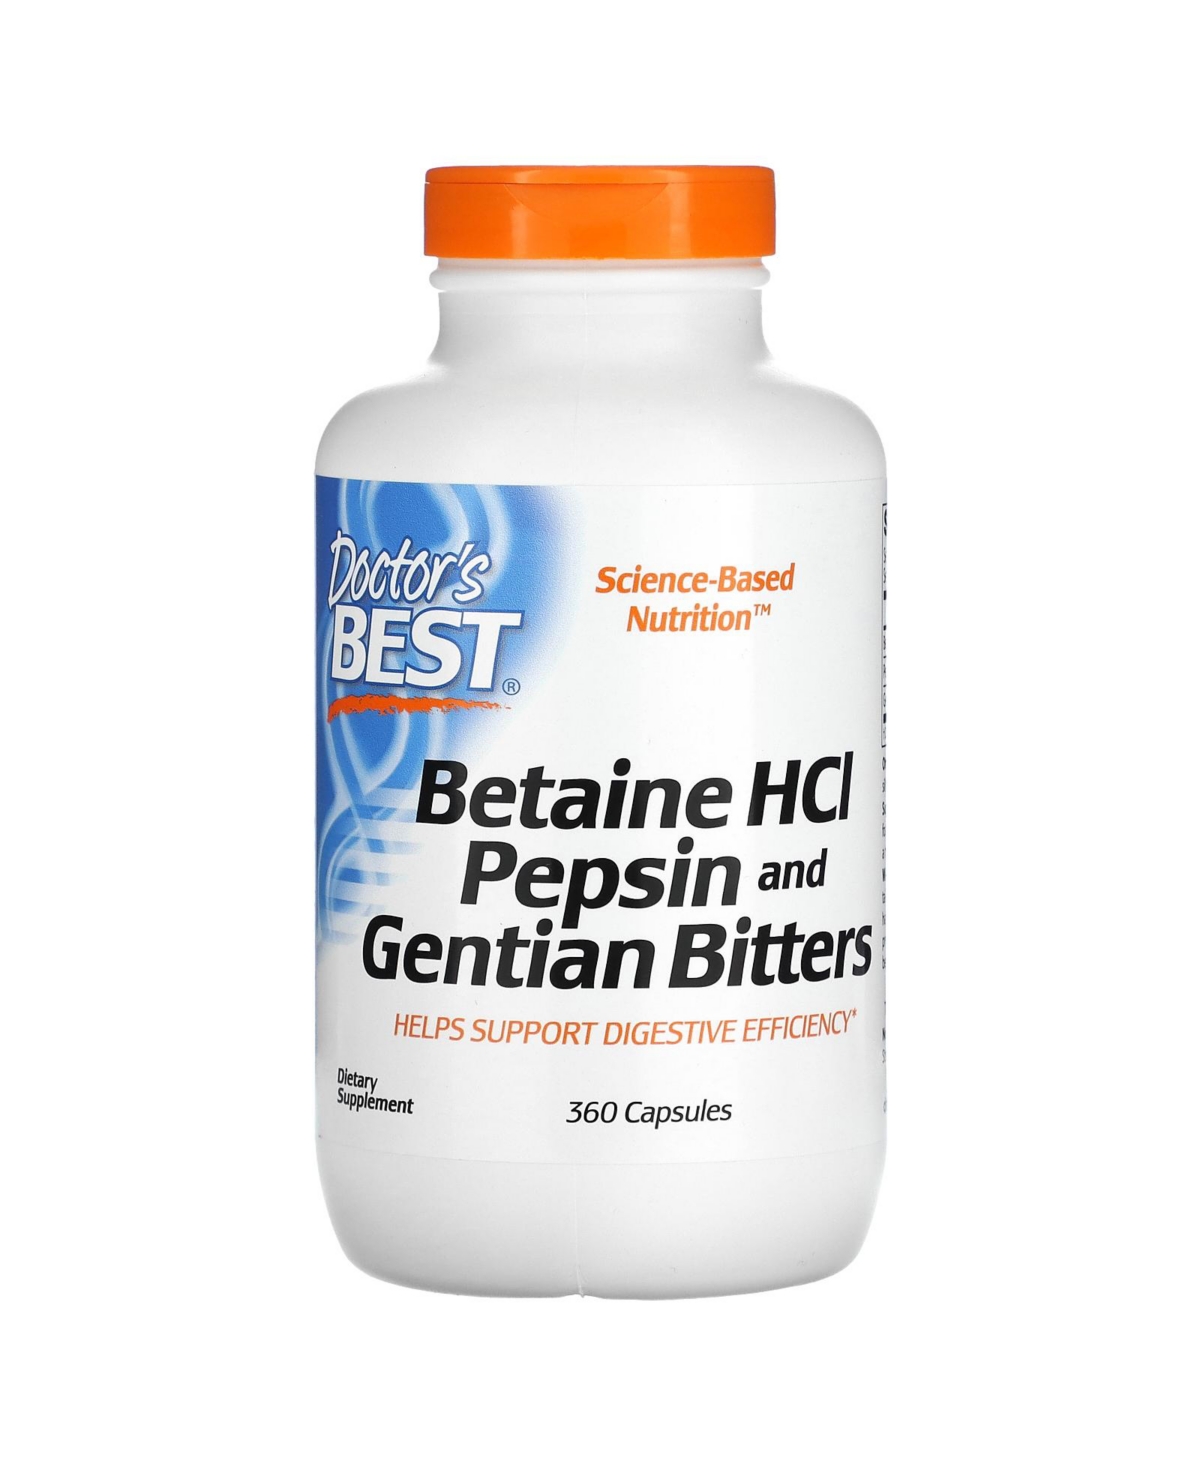 Betaine HCl Pepsin and Gentian Bitters - 360 Capsules - Assorted Pre-Pack